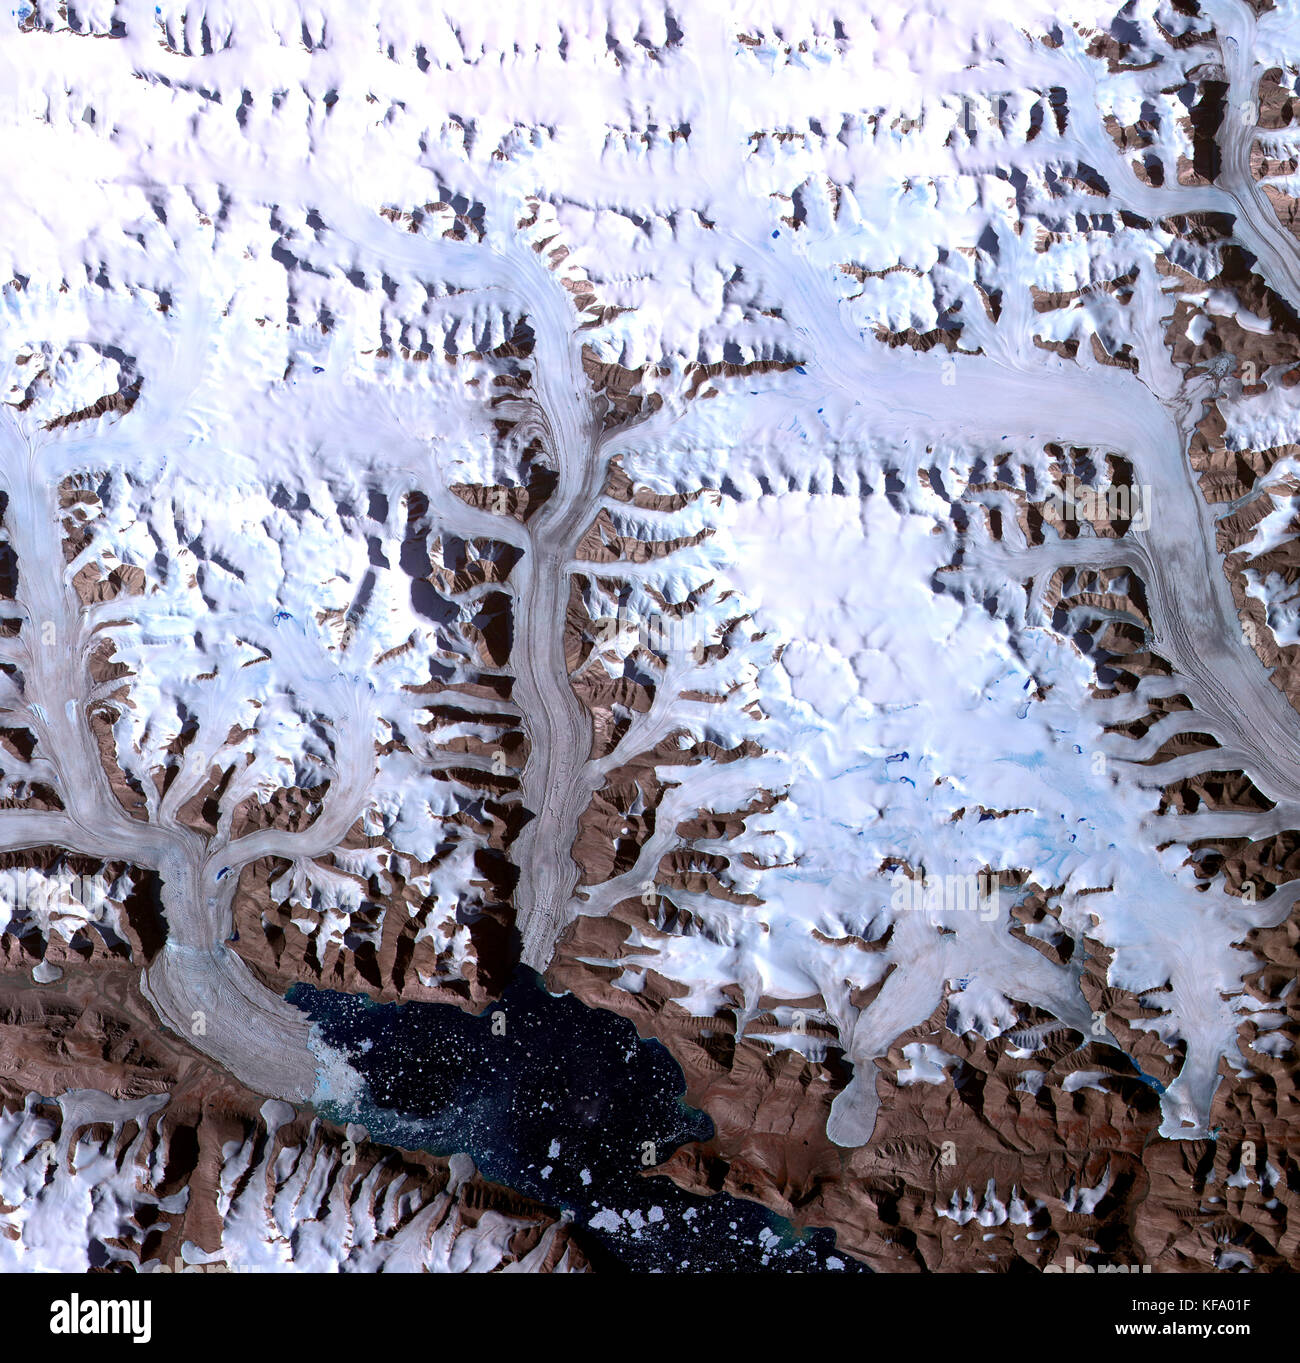 Dobbin Bay is at the bottom of this image of several glaciers in the Canadian Arctic on Ellesmere Island. The image was taken on July 31, 2000. Stock Photo